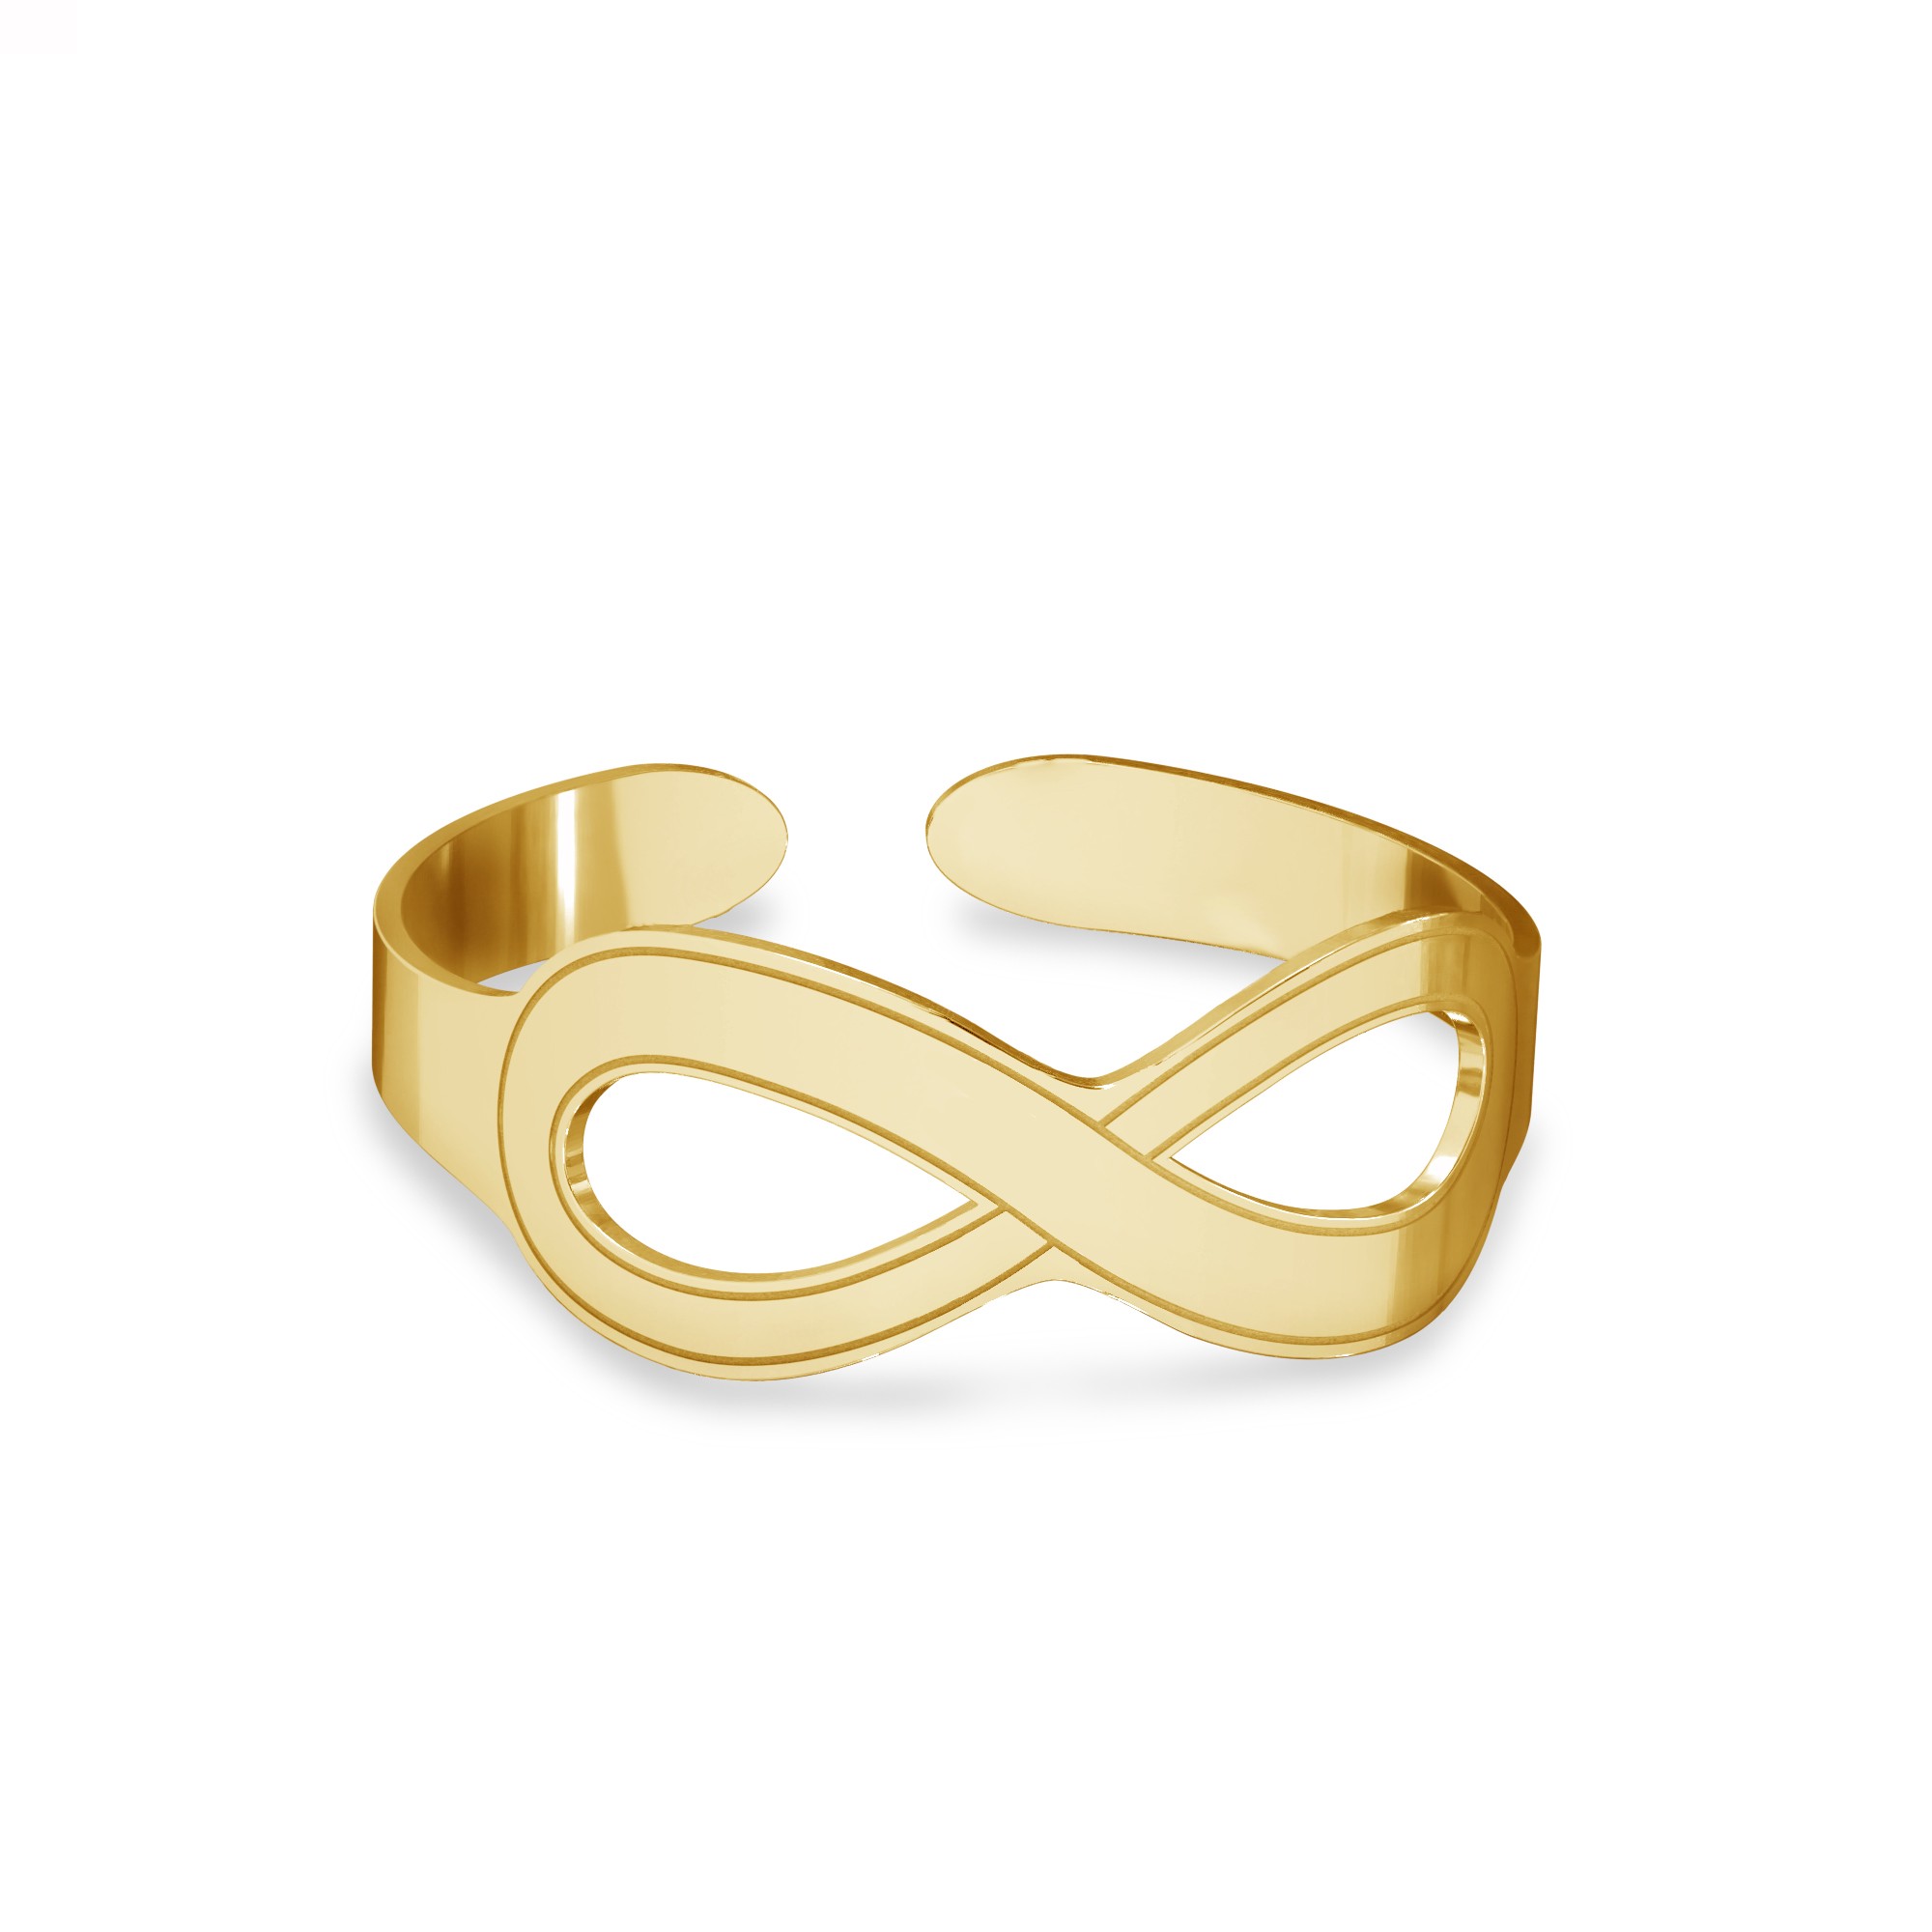 Knuckle ring with infinity sign, sterling silver 925